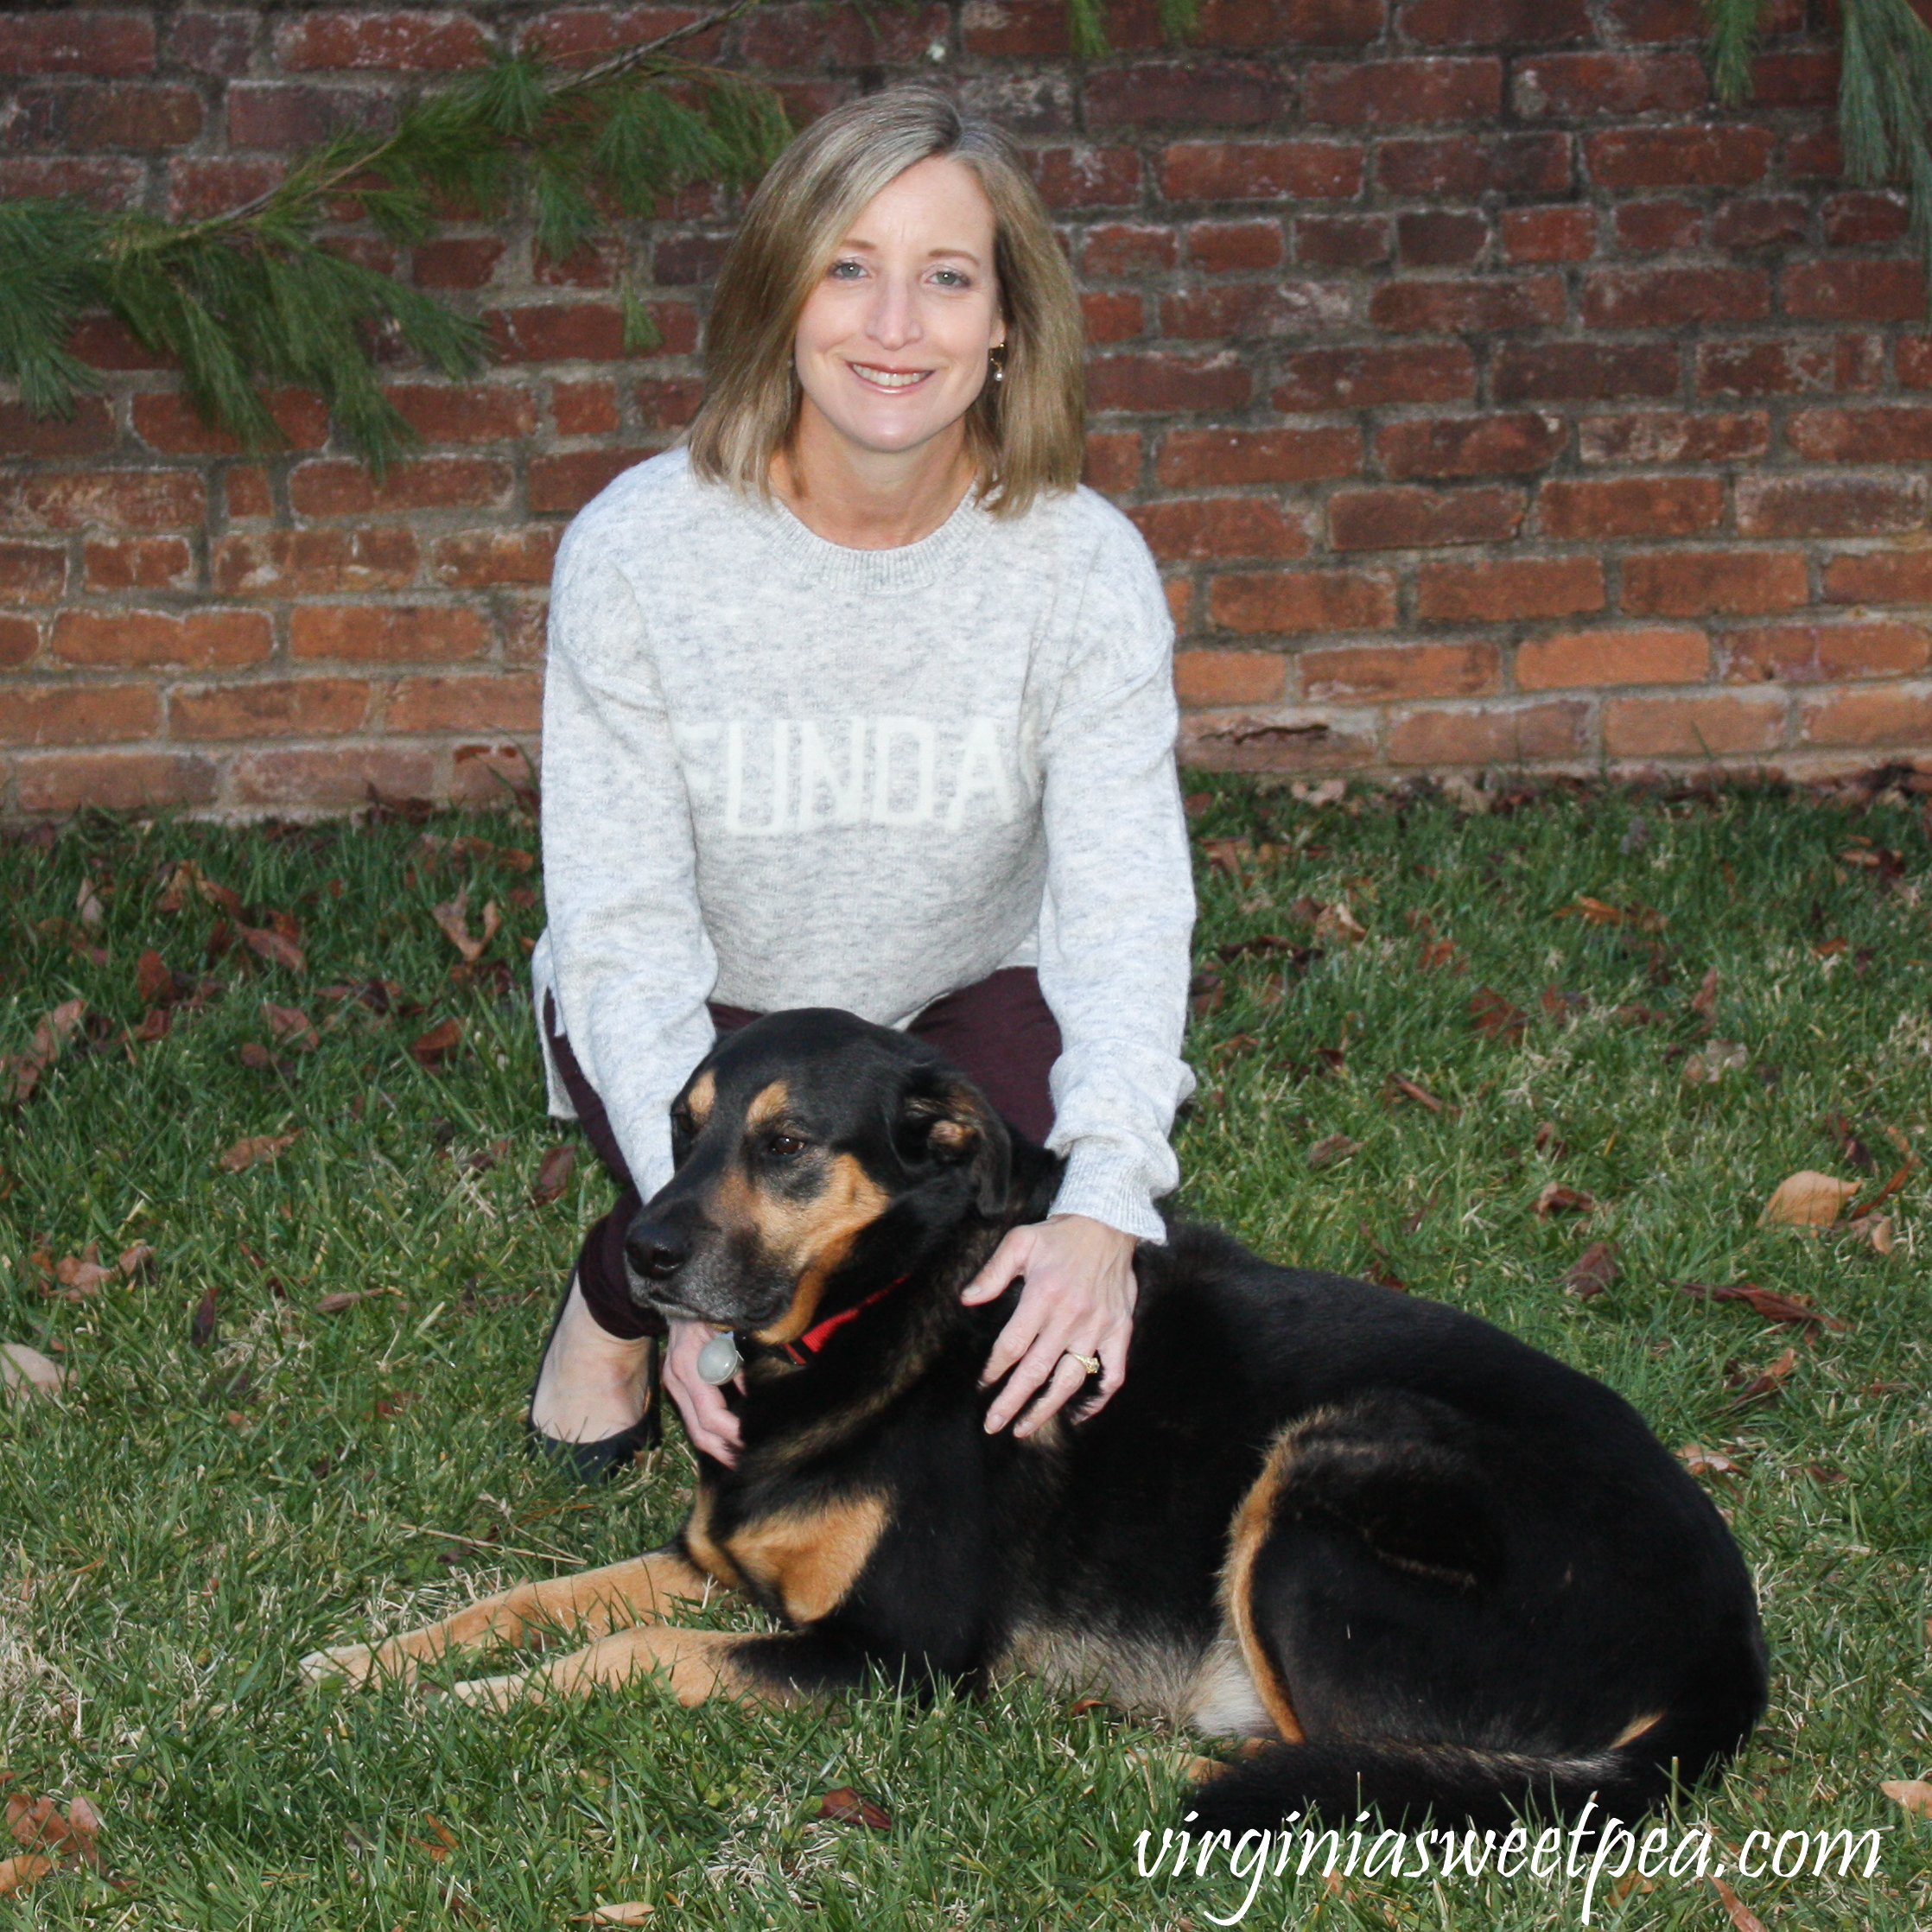 Stitch Fix Review for January 2019 - RD Style Viora Funday Graphic Pullover